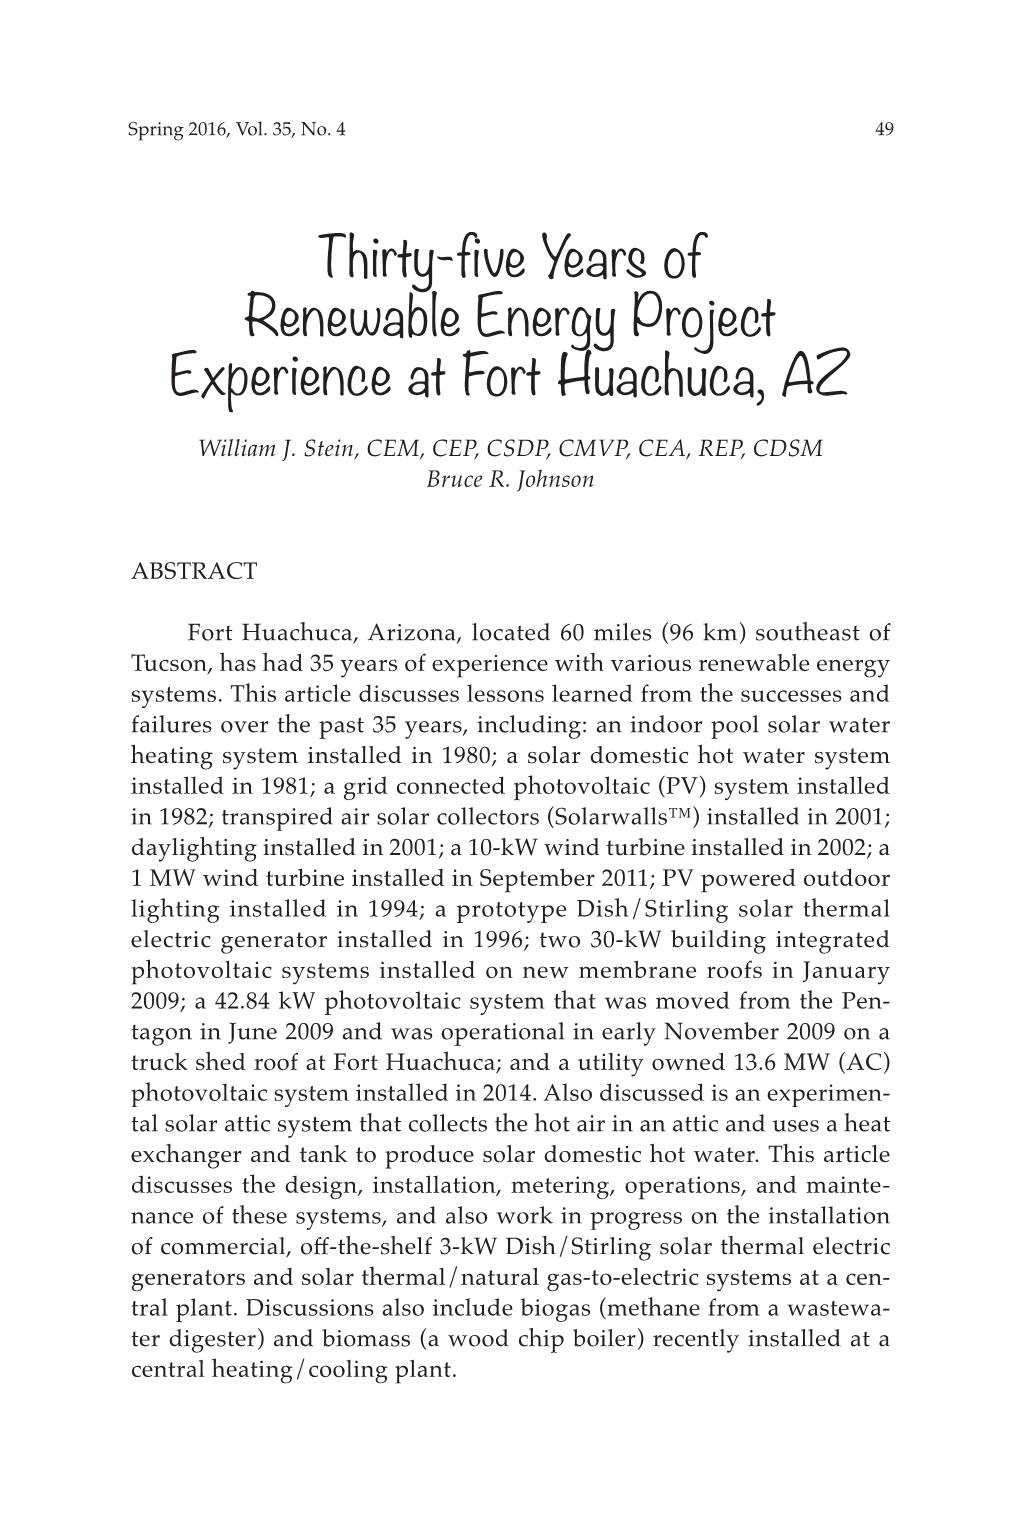 Thirty-Five Years of Renewable Energy Project Experience at Fort Huachuca, AZ